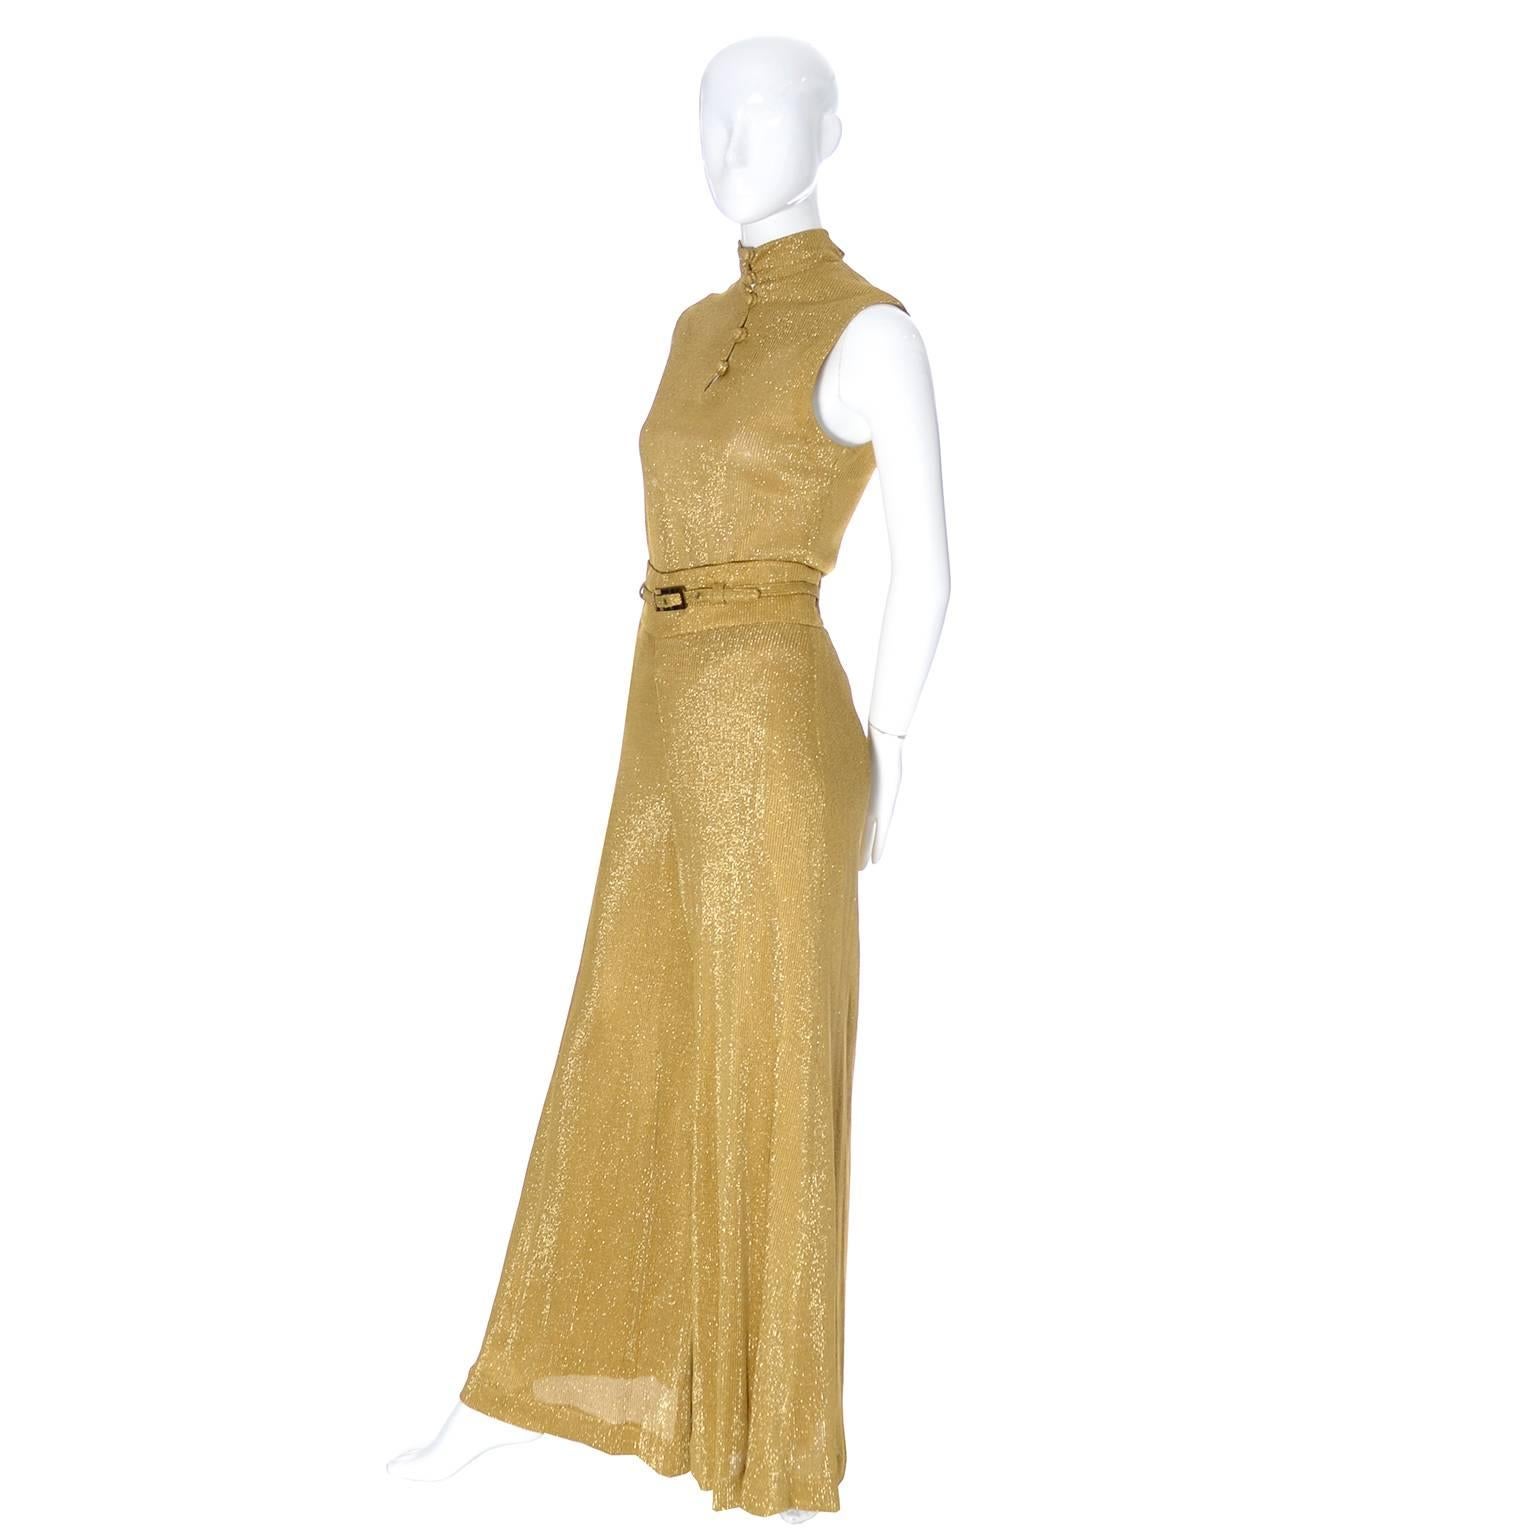 This is a show stopping vintage 2 piece formal outfit in gold metallic knit. Designed by Beverly Paige in the late 1960's or very early1970s, this is the perfect modern vintage alternative to a formal dress.  This 2 piece shimmering gold metallic